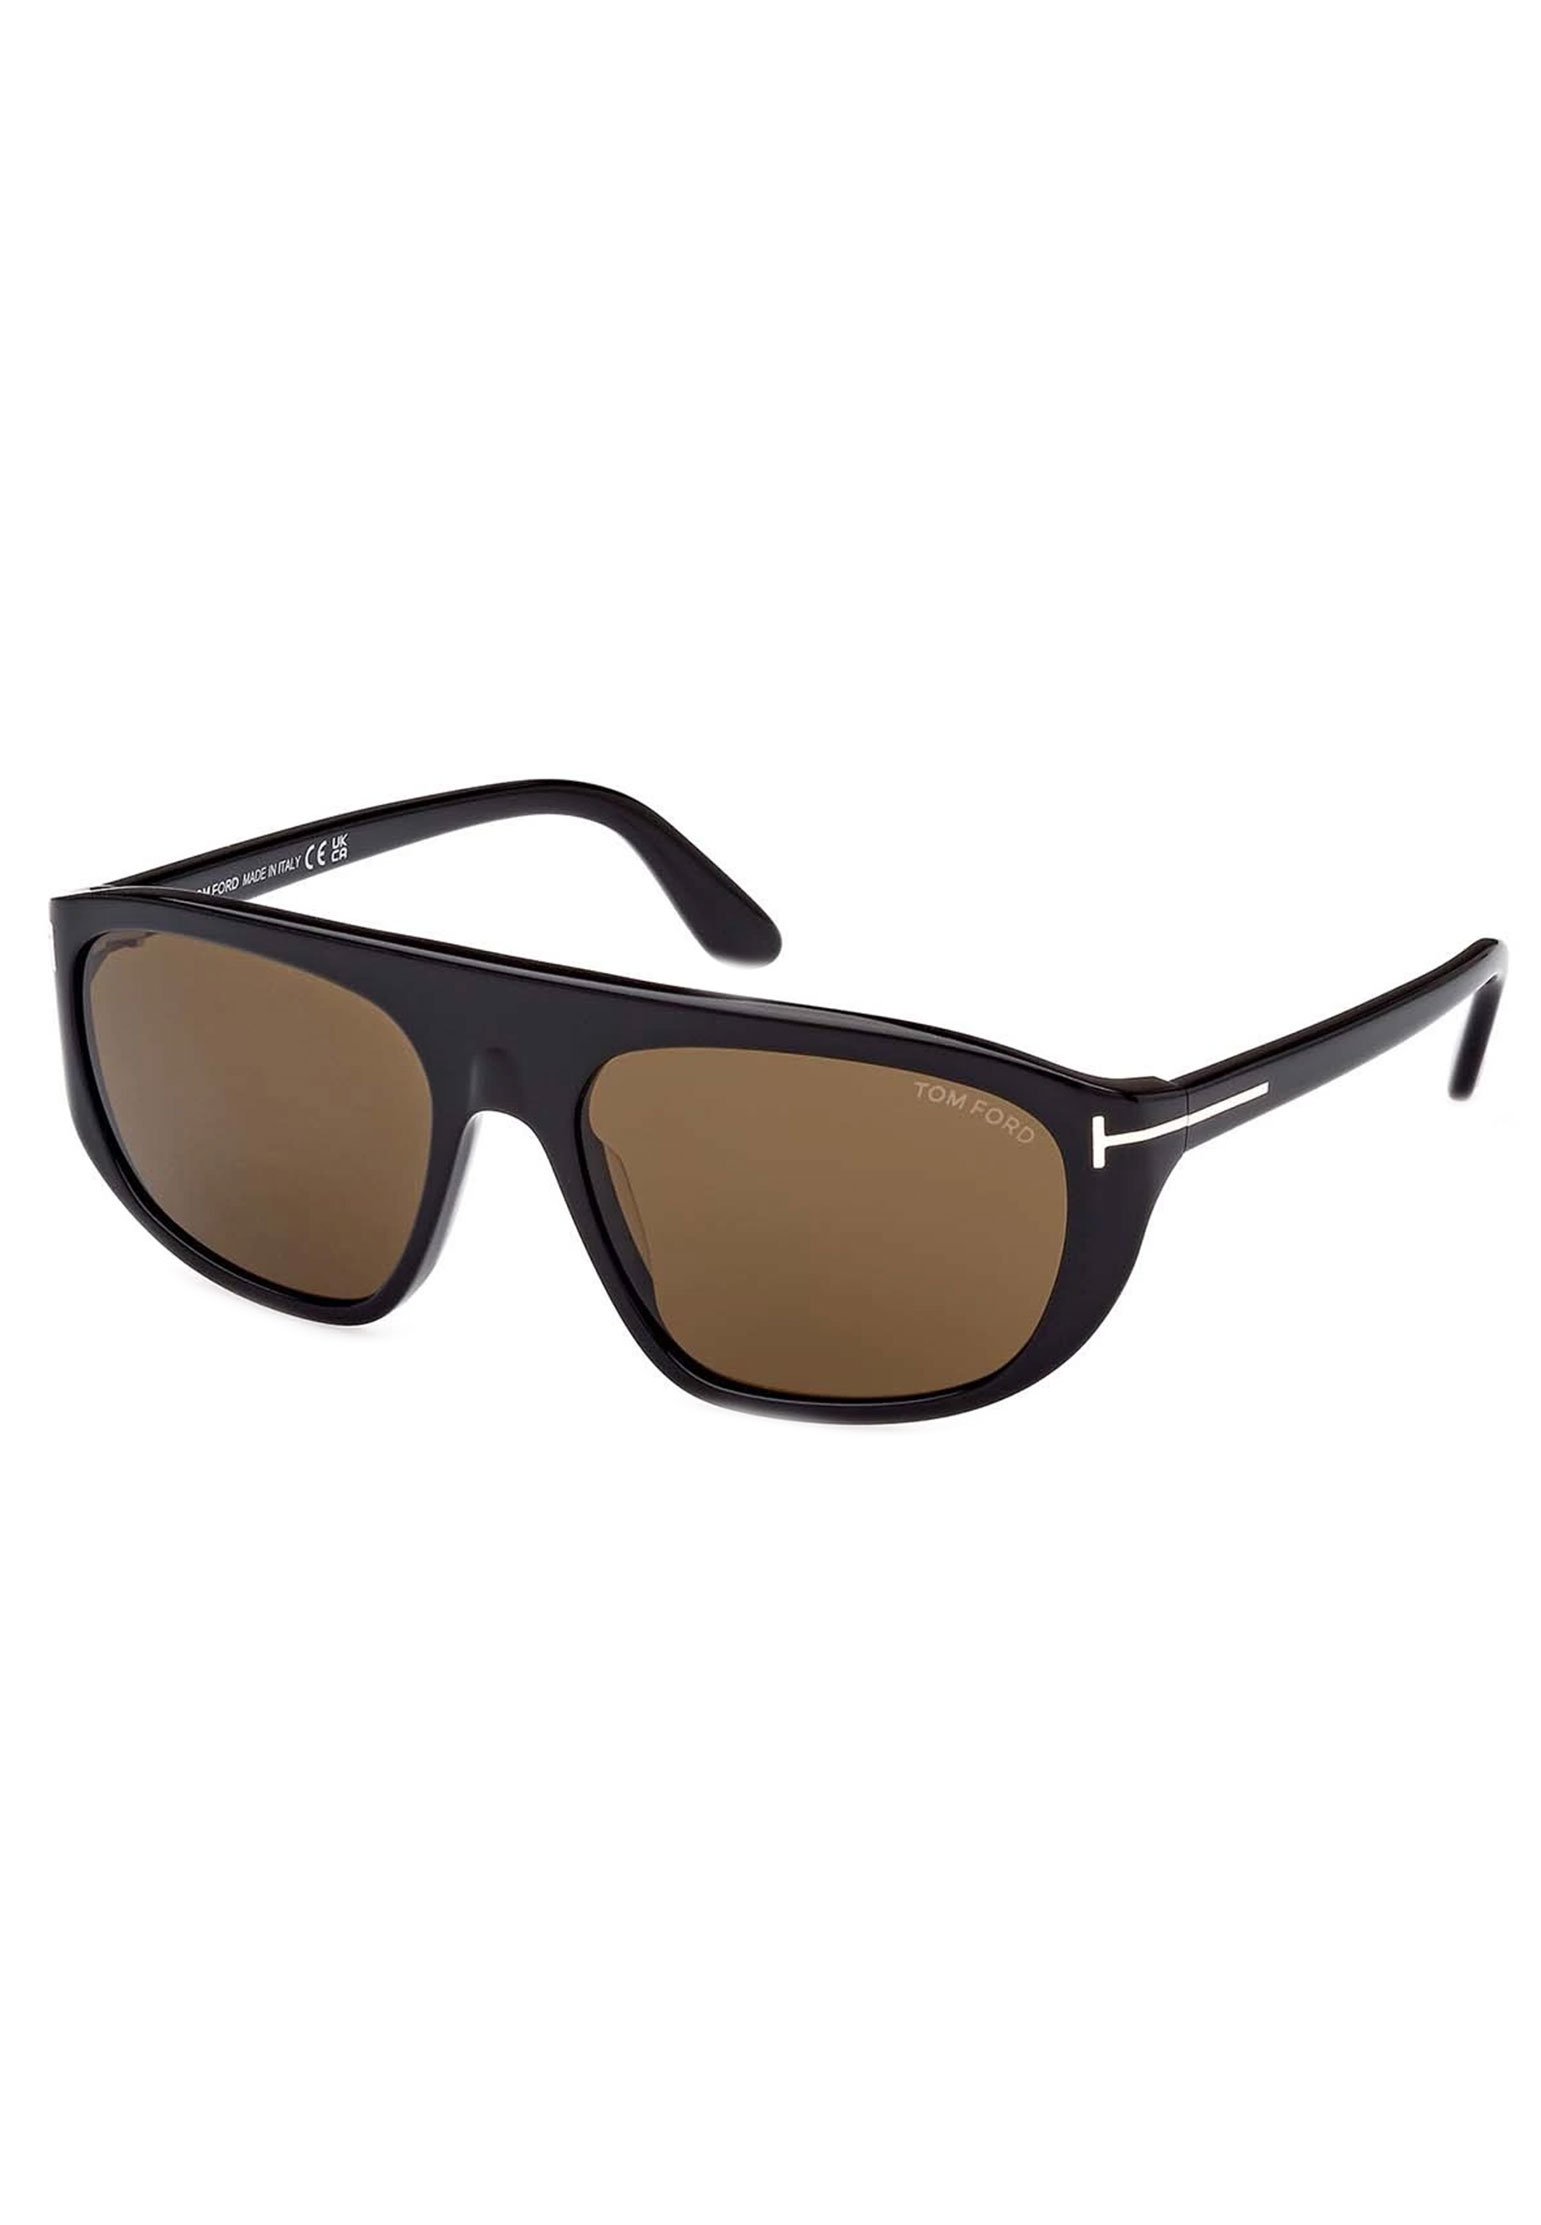 Sunglass TOM FORD Color: black (Code: 1665) in online store Allure